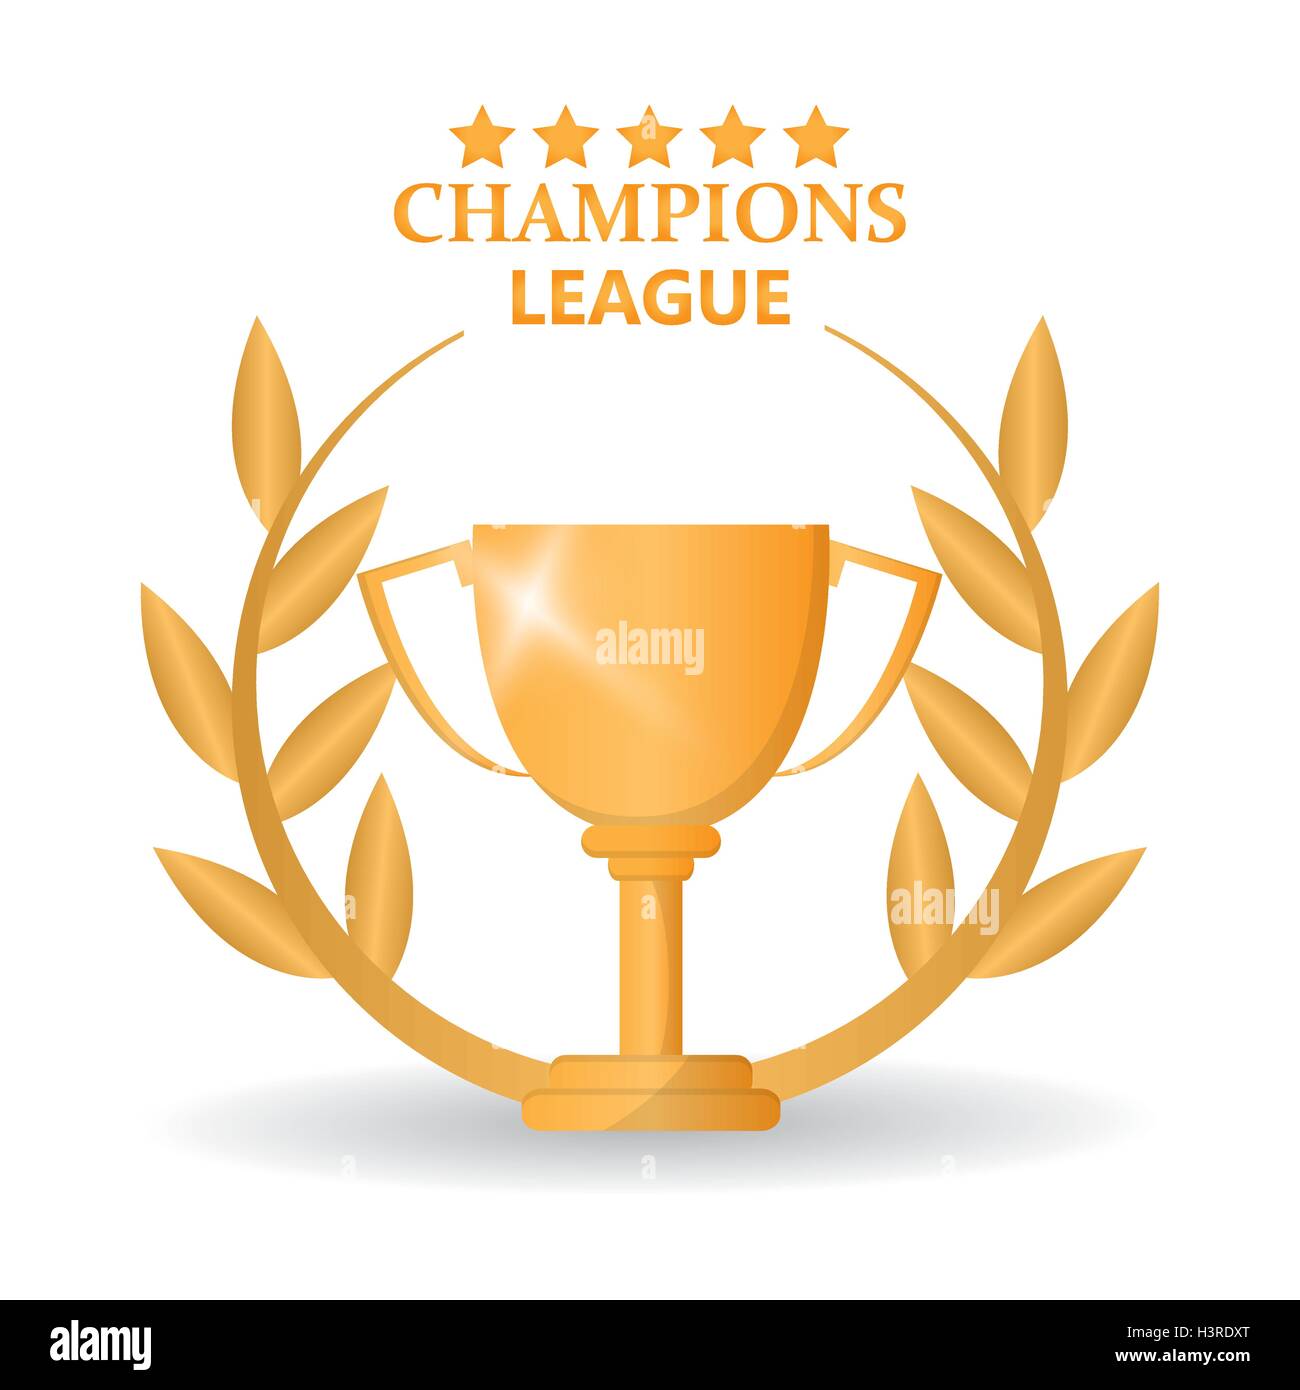 Champions league trophy isolated Cut Out Stock Images & Pictures